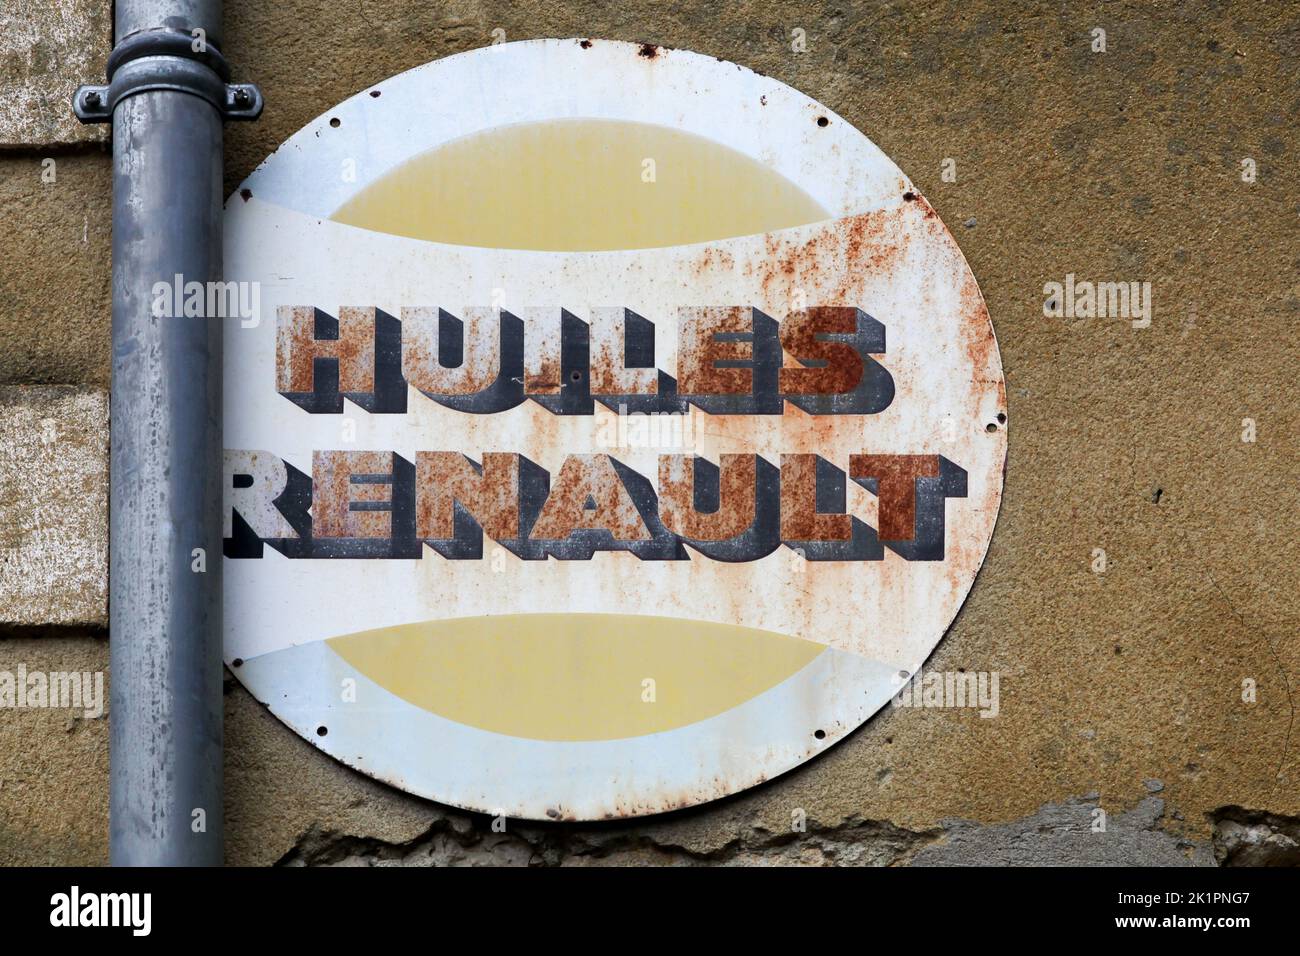 Le Vigan, France - June 26, 2021: Old advertising of Huiles Renault on a wall Stock Photo